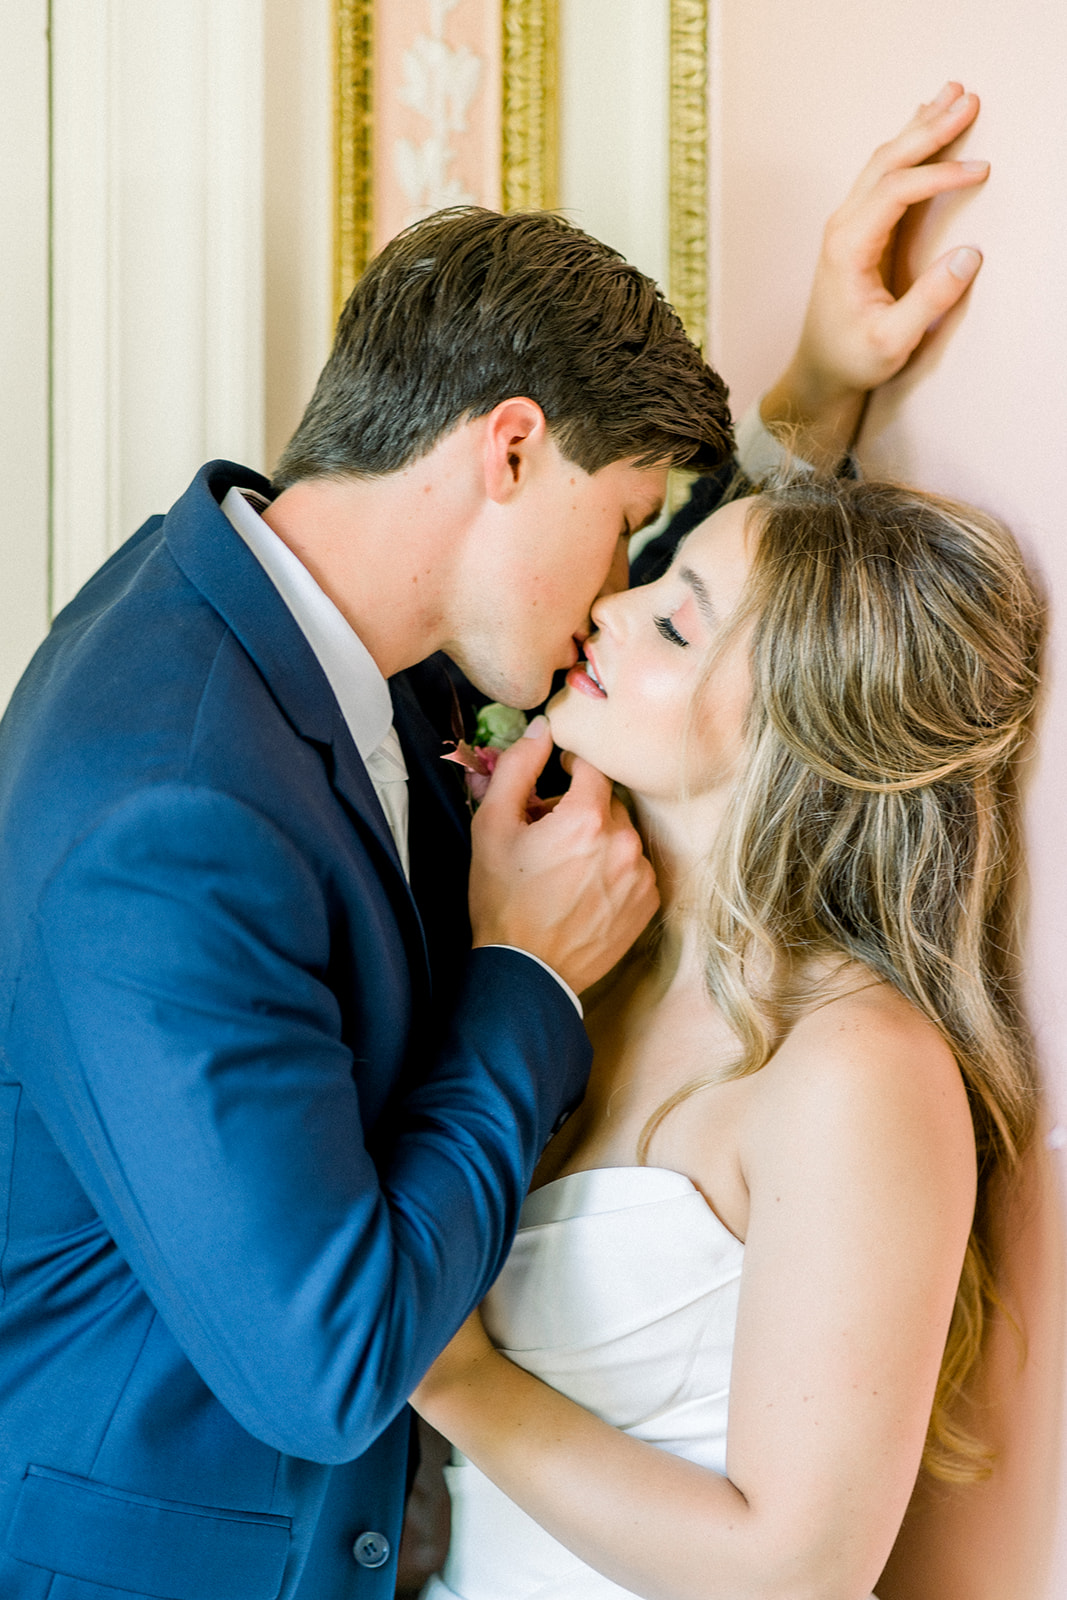 Bride and groom sharing a romantic kiss, showcasing a luxury destination wedding at Cairnwood Estate